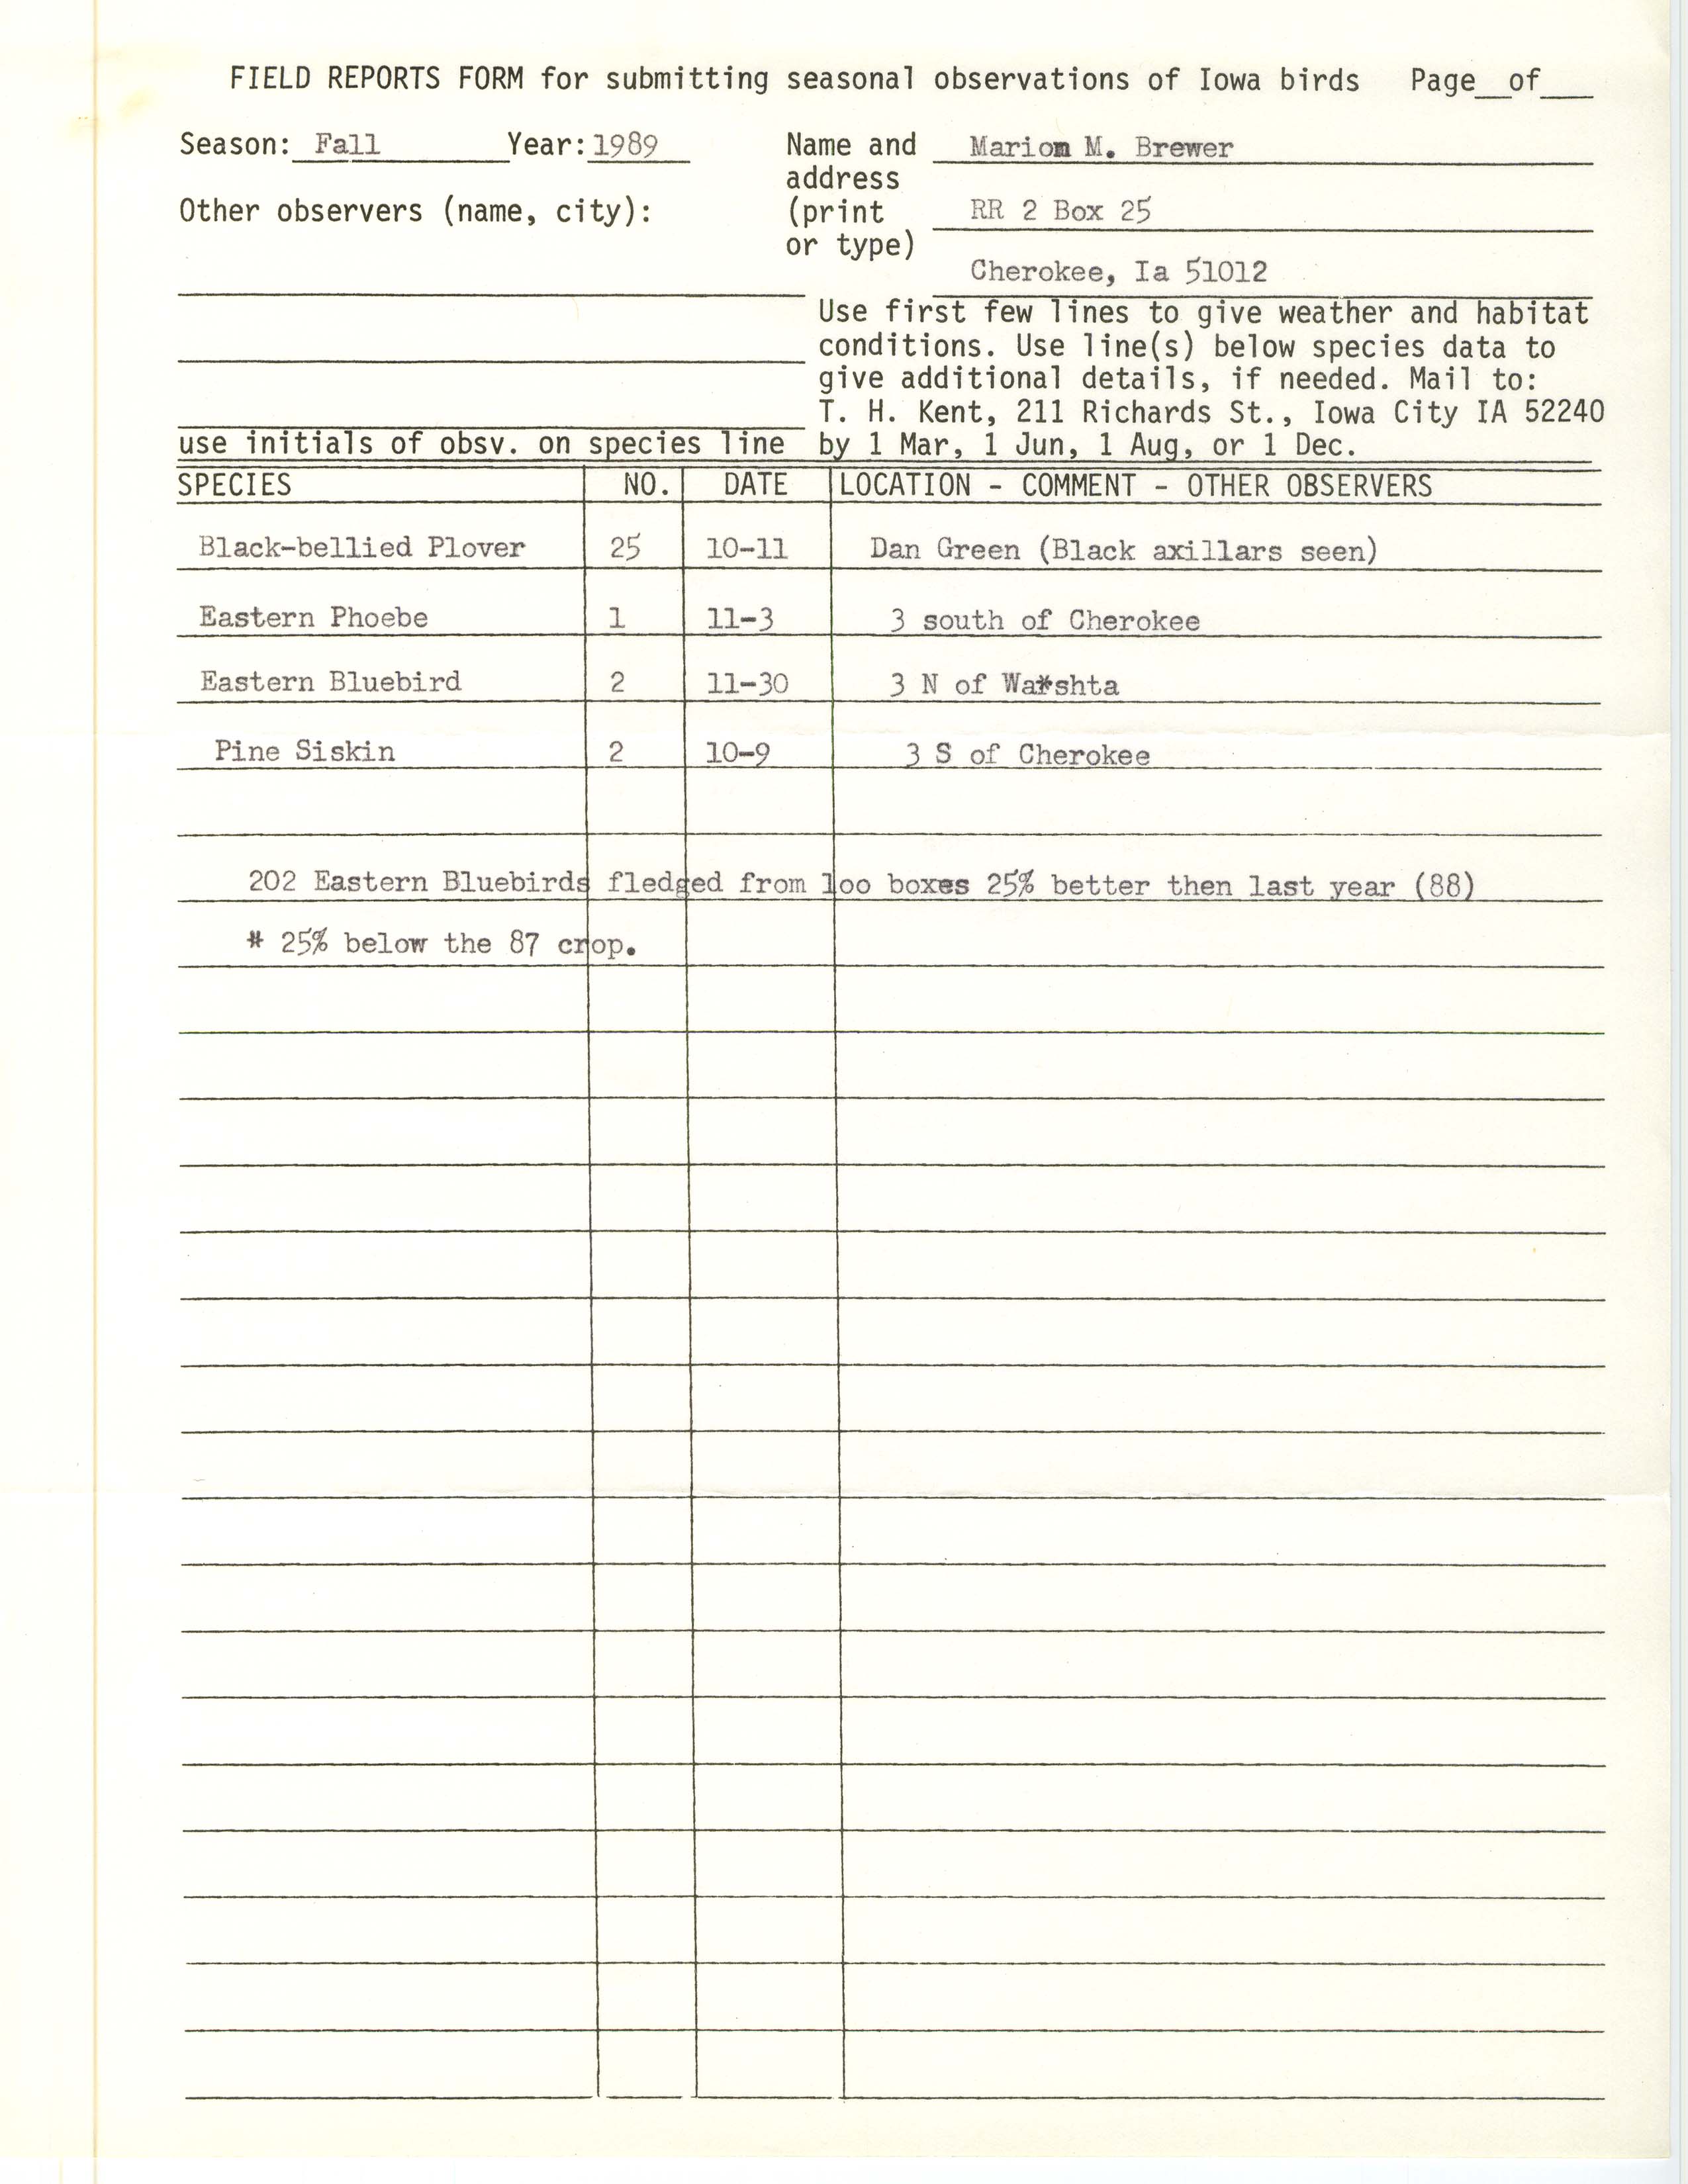 Field reports, Marion M. Brewer, fall 1989 